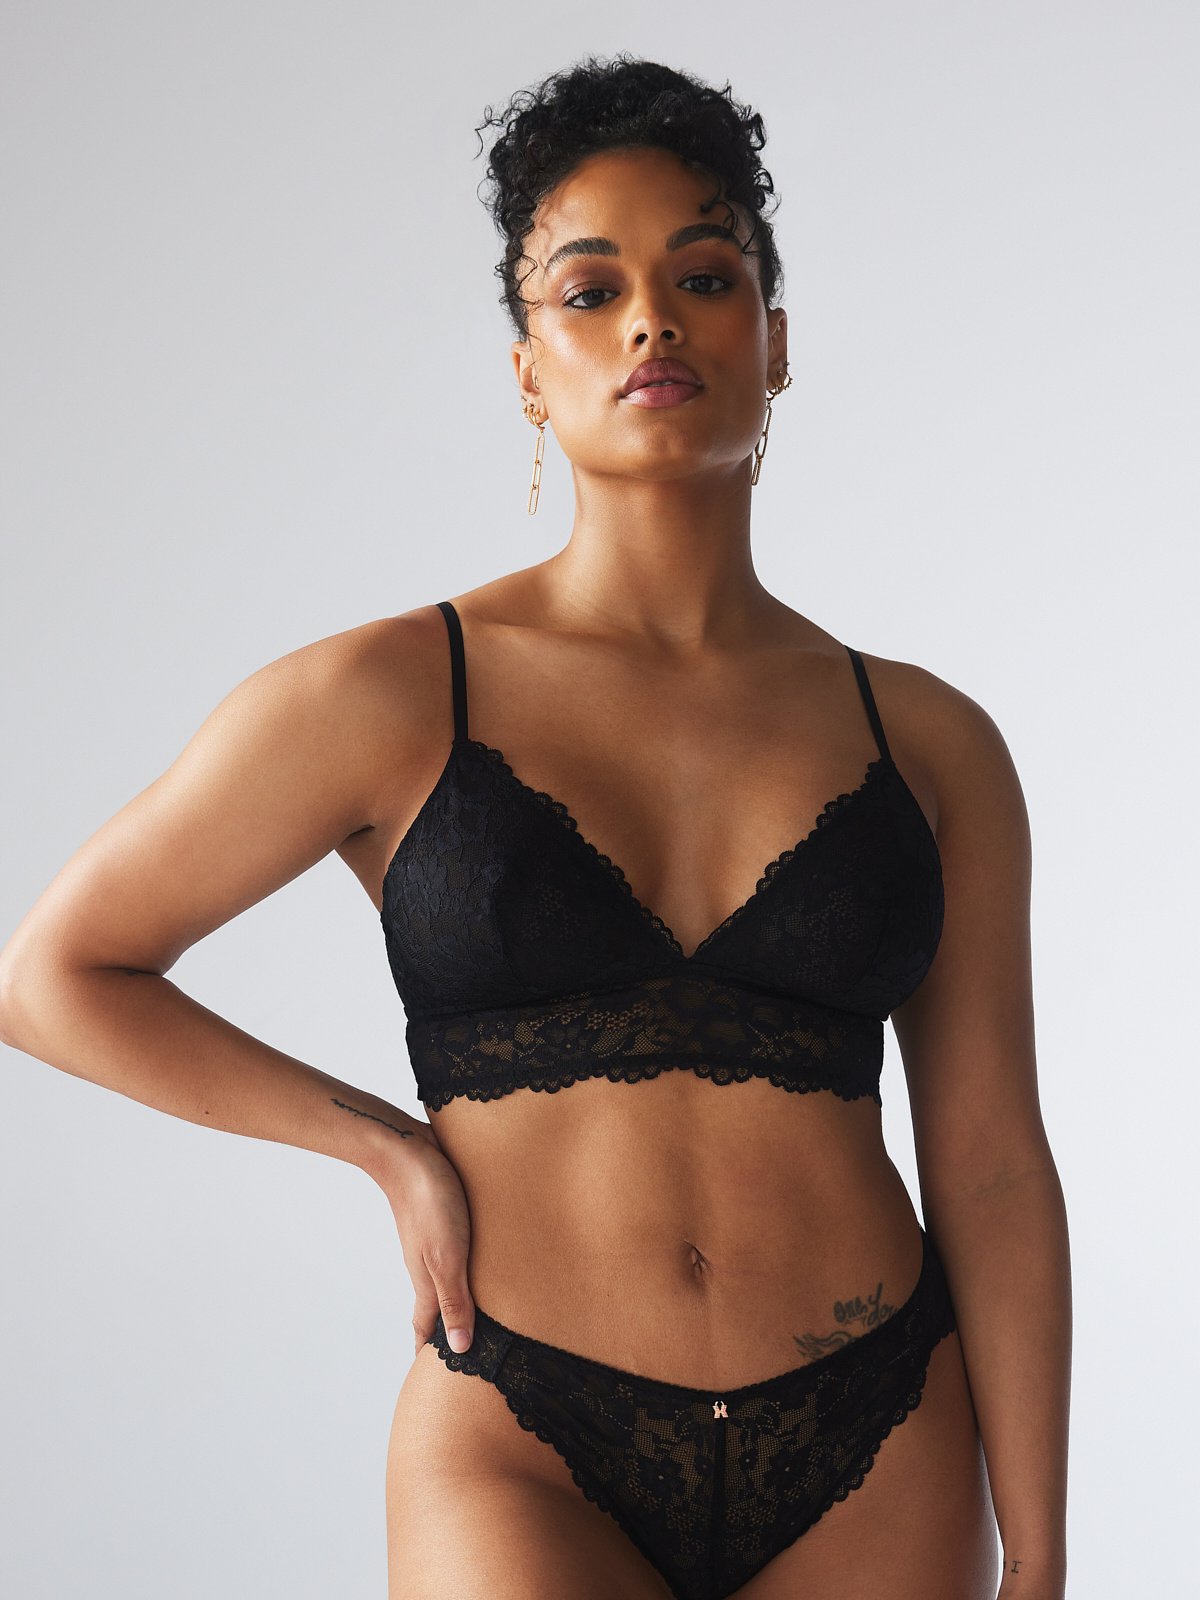 Floral Lace Seamless Black Lace Bralette With Transparent Cup